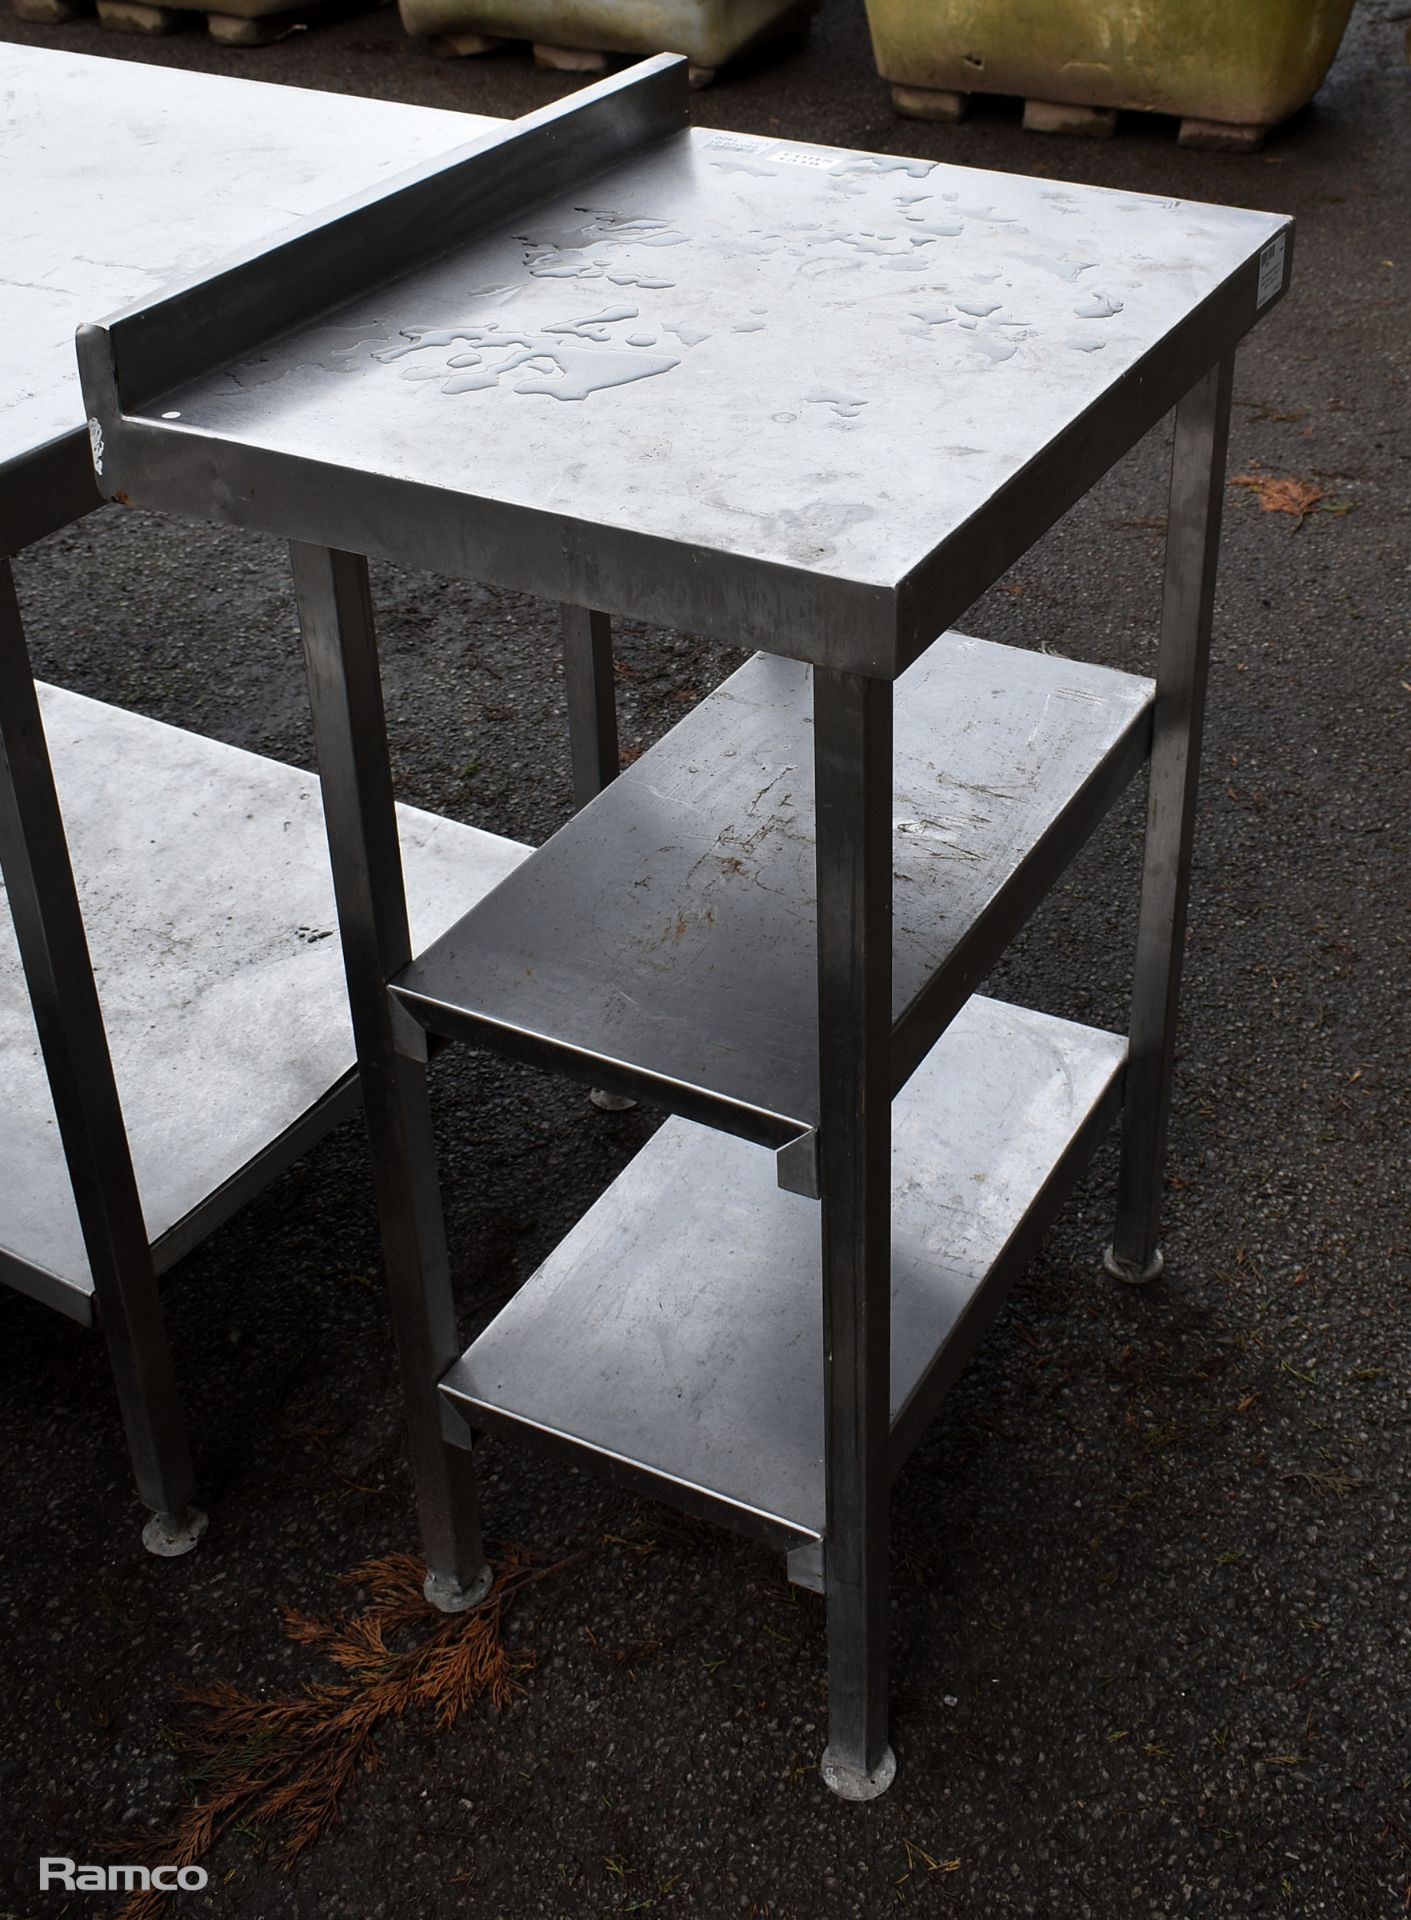 Stainless steel table with 2 lower shelves - W 600 x D 480 x H 960mm - Image 3 of 3